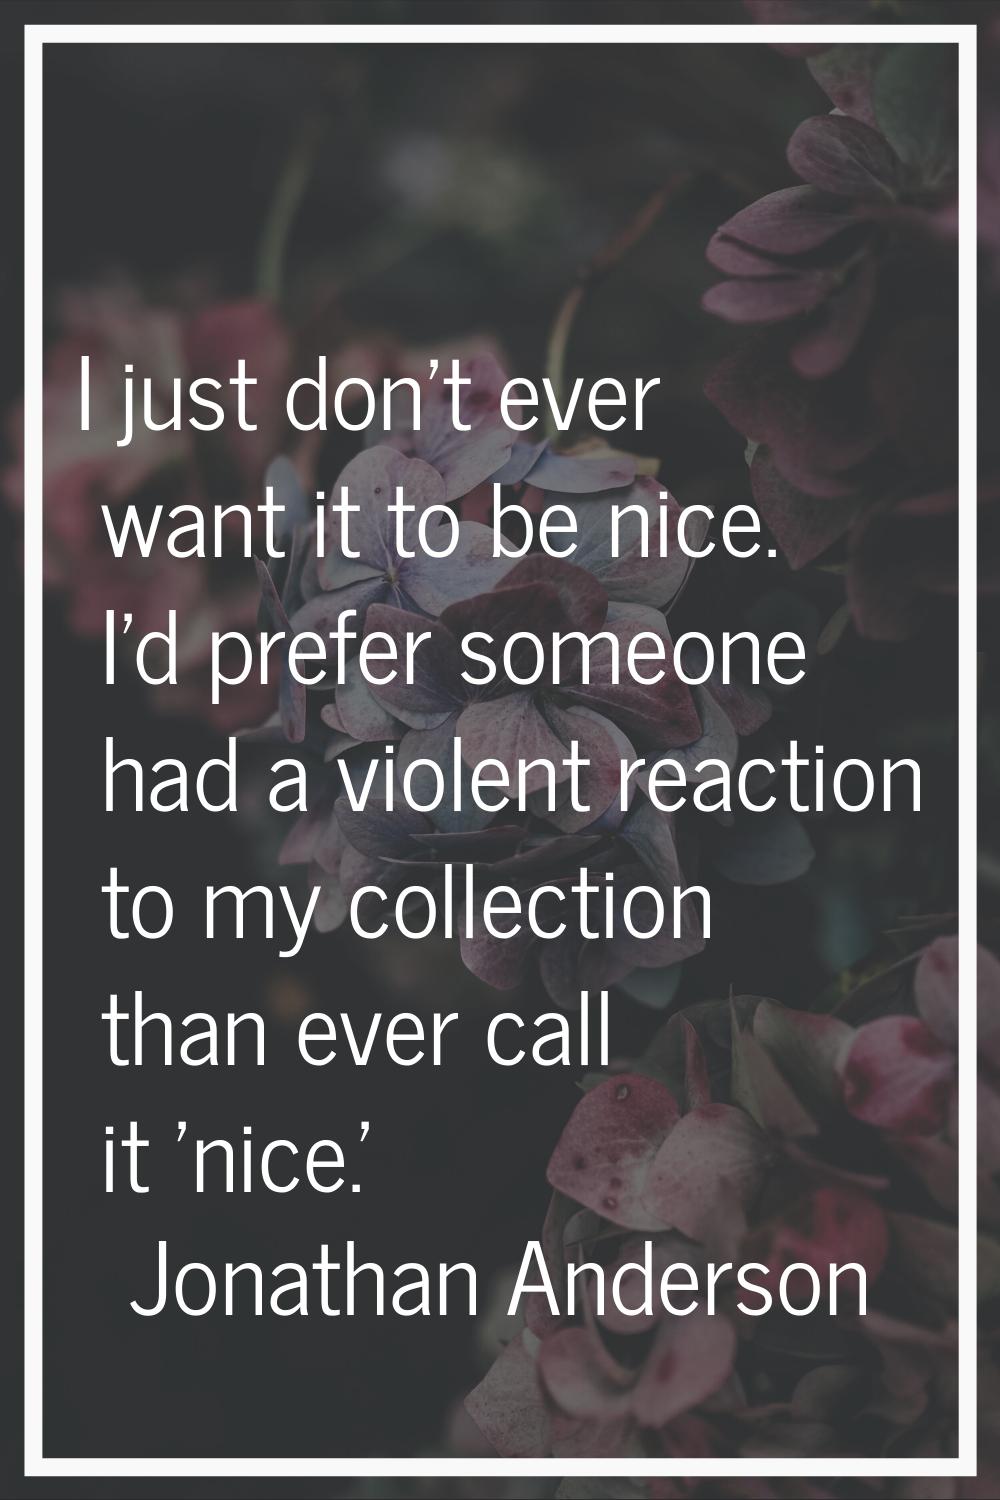 I just don't ever want it to be nice. I'd prefer someone had a violent reaction to my collection th